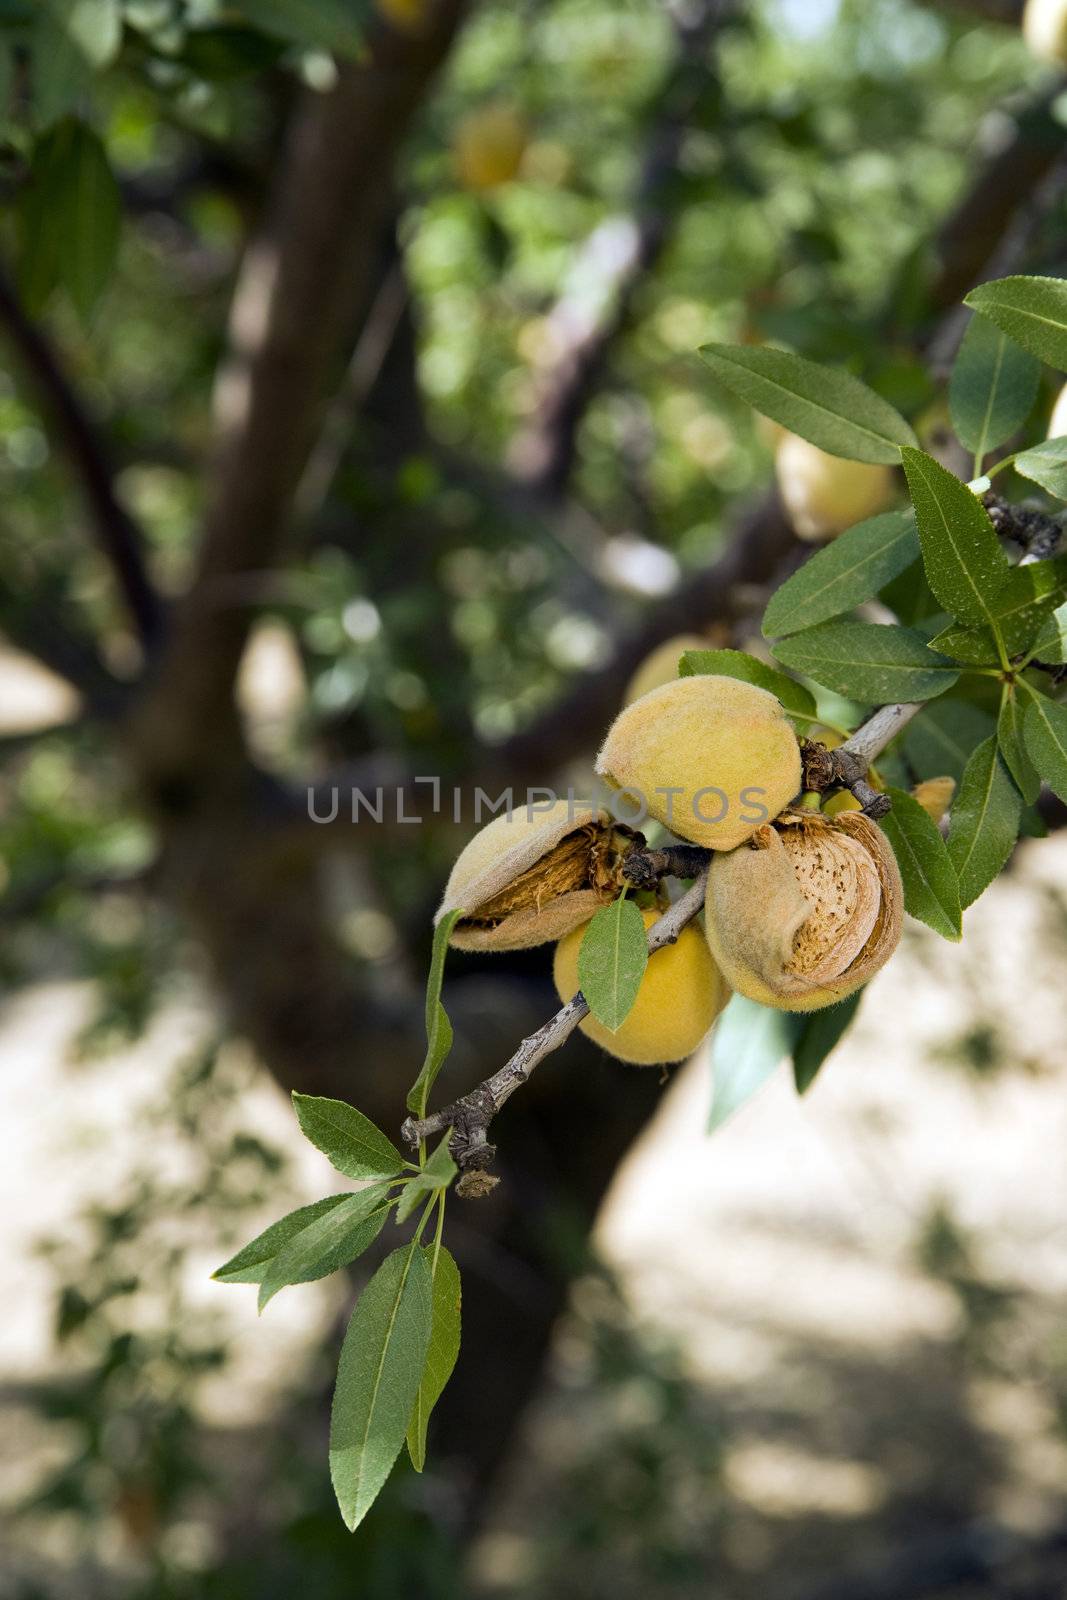 Almond Tree still needs time before the harvest